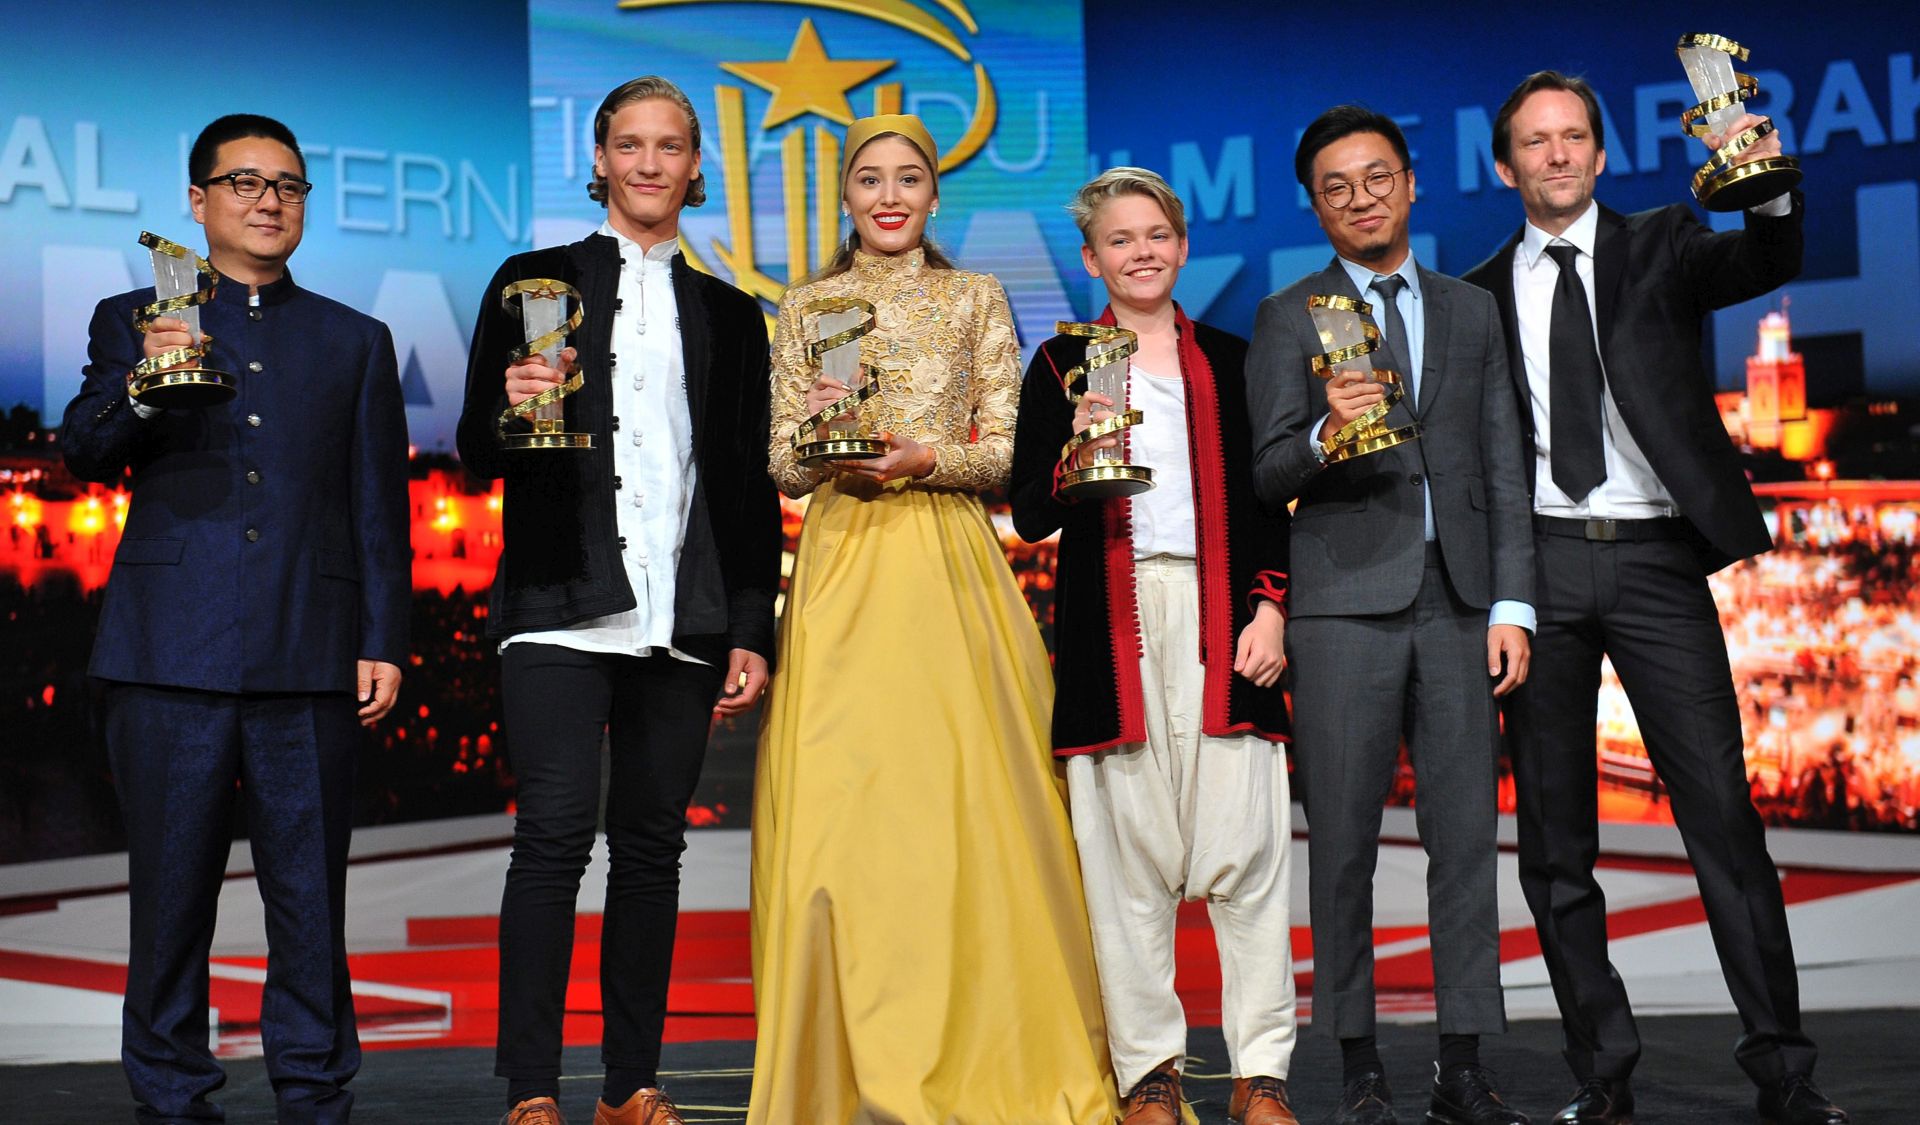 epa05670102 (L-R) Award winners Chinese director Zang Qi Wu (Grand Prize 'Star of Gold' for the film 'Donor'), Icelandic actor Blaer Hinriksson (Best Male Performance for the film 'Hearststone'), Afghan actress  Freshteh Hossein (best performance by an actress for 'Parting'), Danish actor Bladur Einarsson (Best Male Performance for the film 'Hearststone'), Chinese producer Wang Zijian (best directing prize for the film 'Knife in the clear water')  and Italian director (best jury prize for the film 'Mister Universo') during the award ceremony of the 16th Marrakesh International Film Festival in Marrakesh, Morocco, 10 December 2016.  EPA/ABDELHAK SENNA